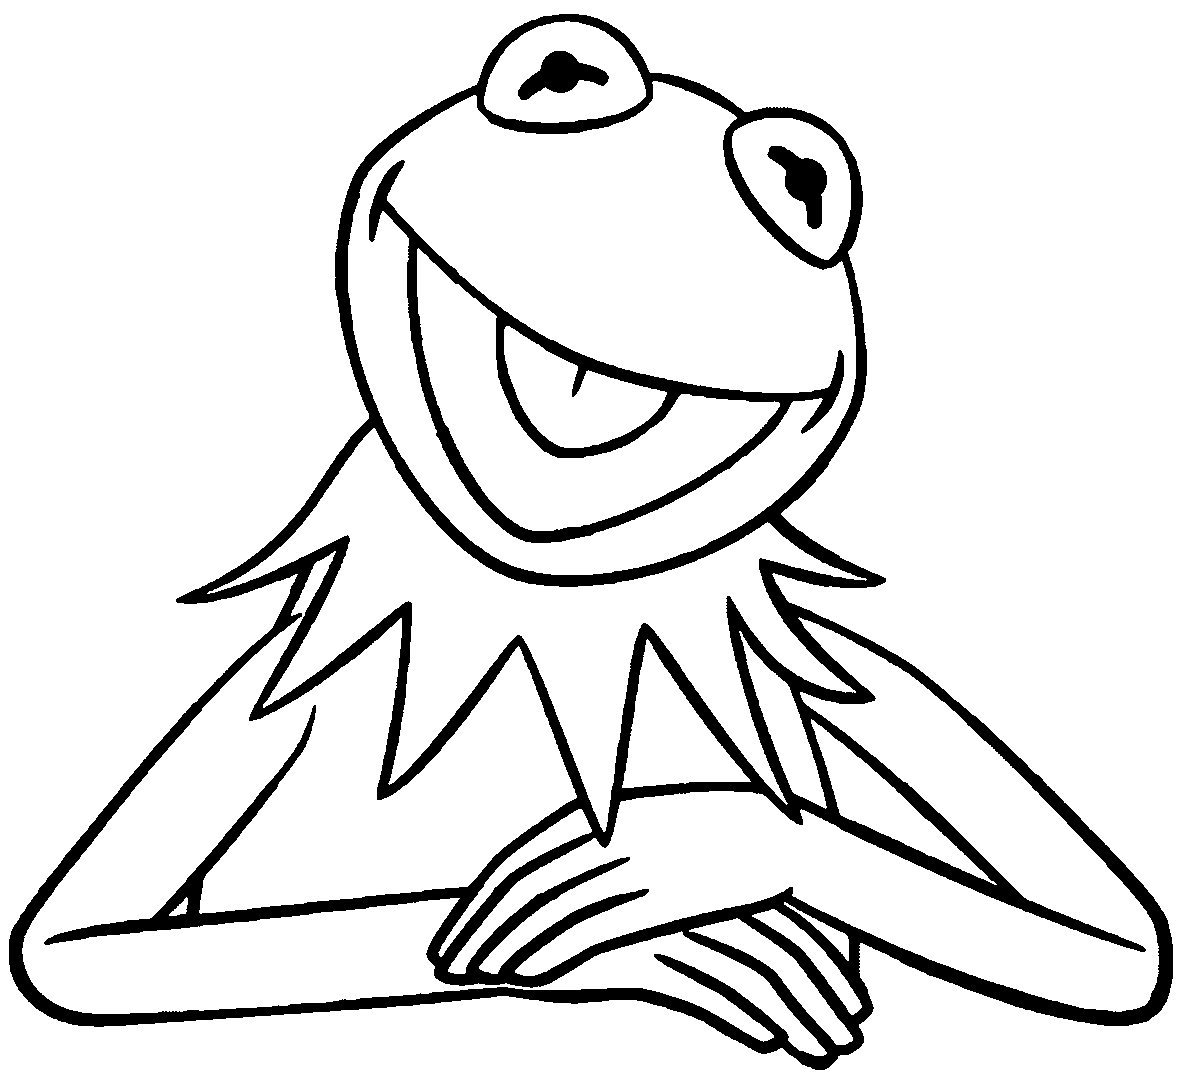 kermit the frog coloring pages kermit the frog coloring pages bestappsforkidscom kermit pages the frog coloring 